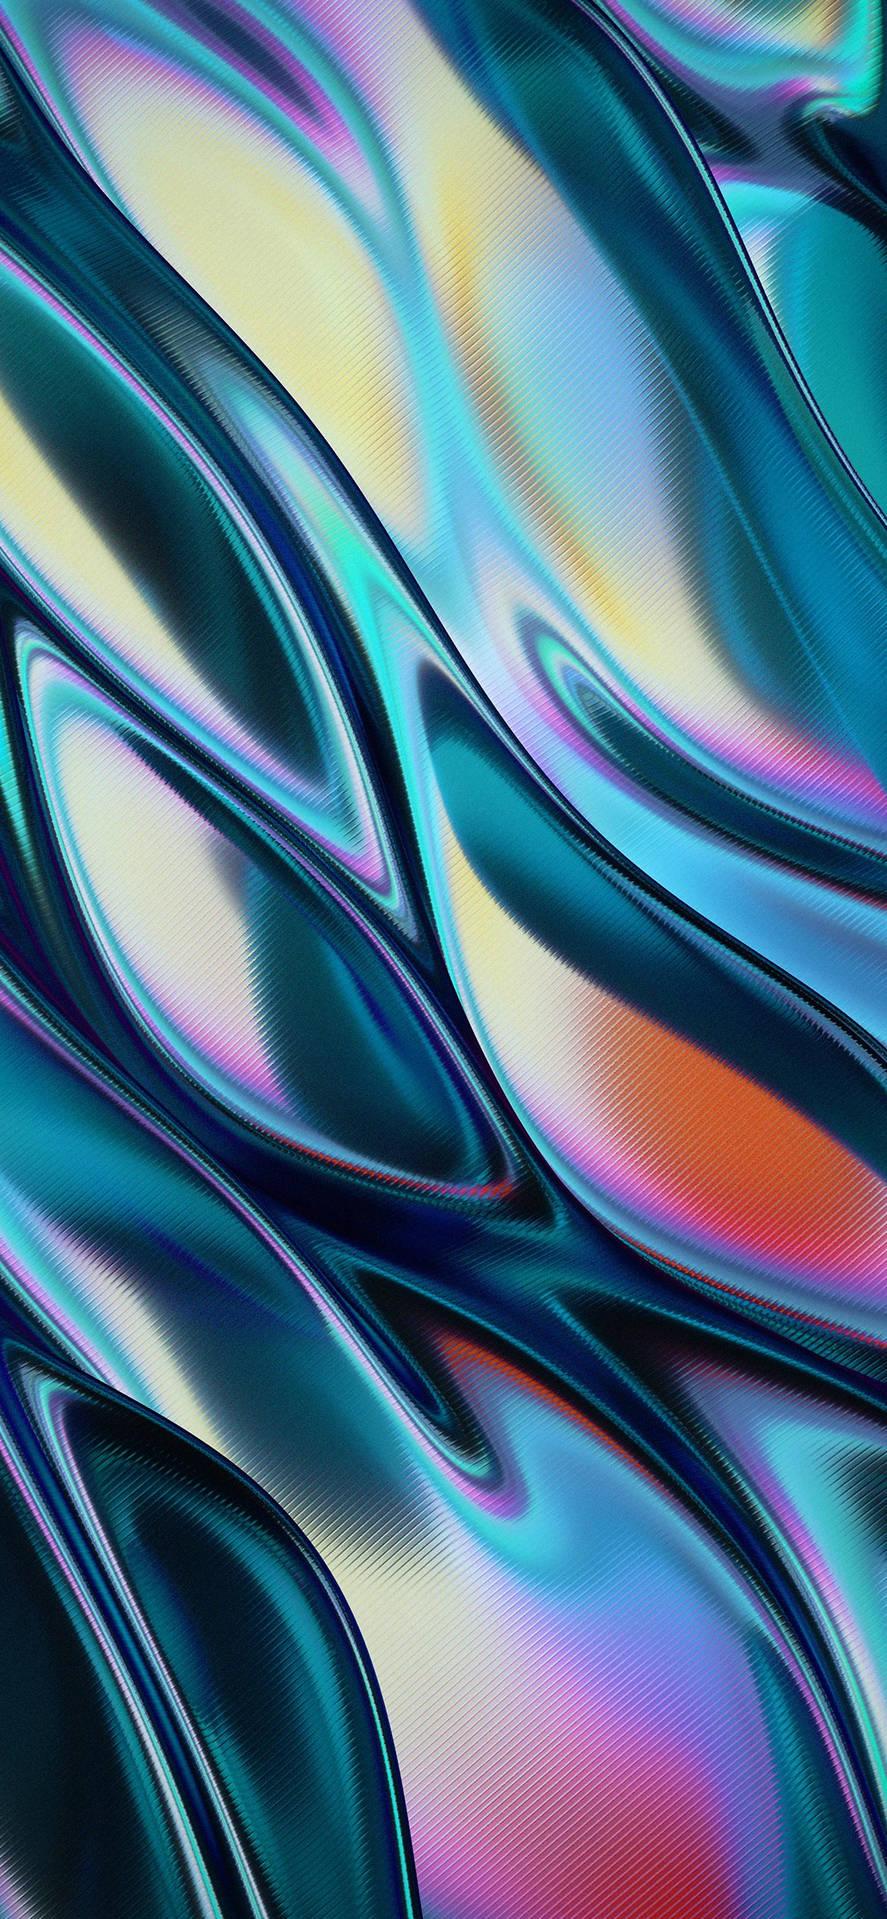 iPhone Pro Colorful Abstract Wallpaper